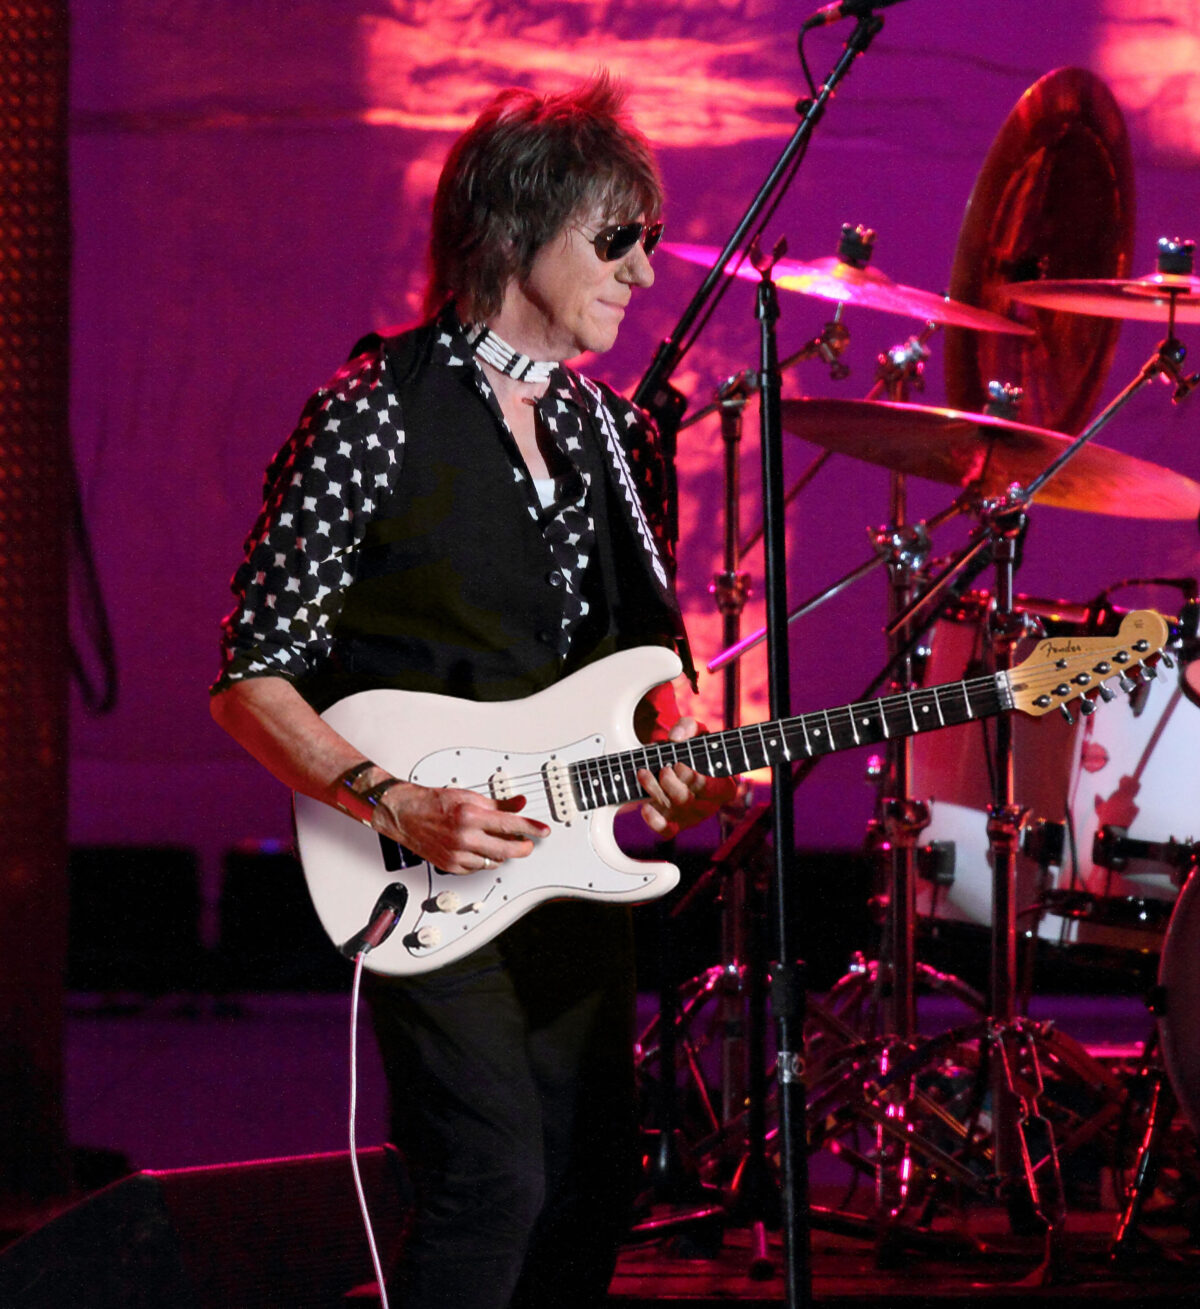 Famed UK Guitarist/Musician, Jeff Beck, Passes Peacefully In His Home